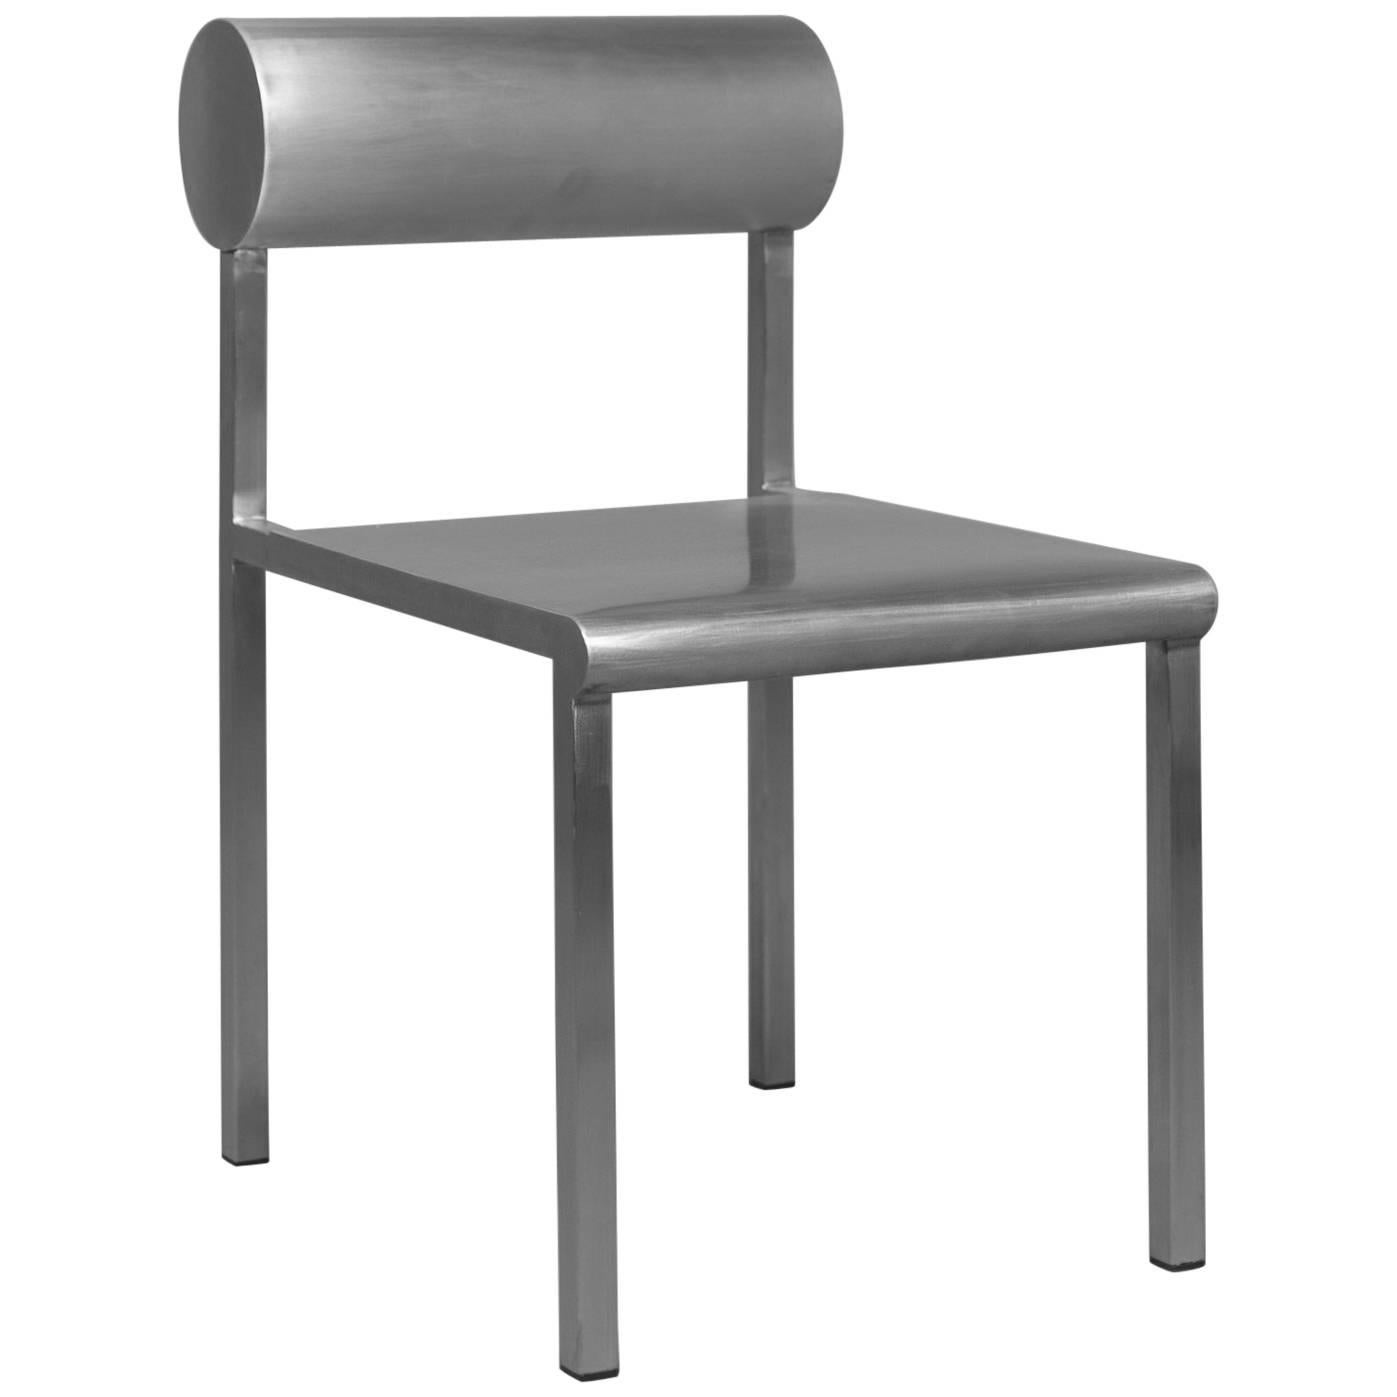 Waka Waka Contemporary Cylinder Back Stainless Steel Accent Chair For Sale